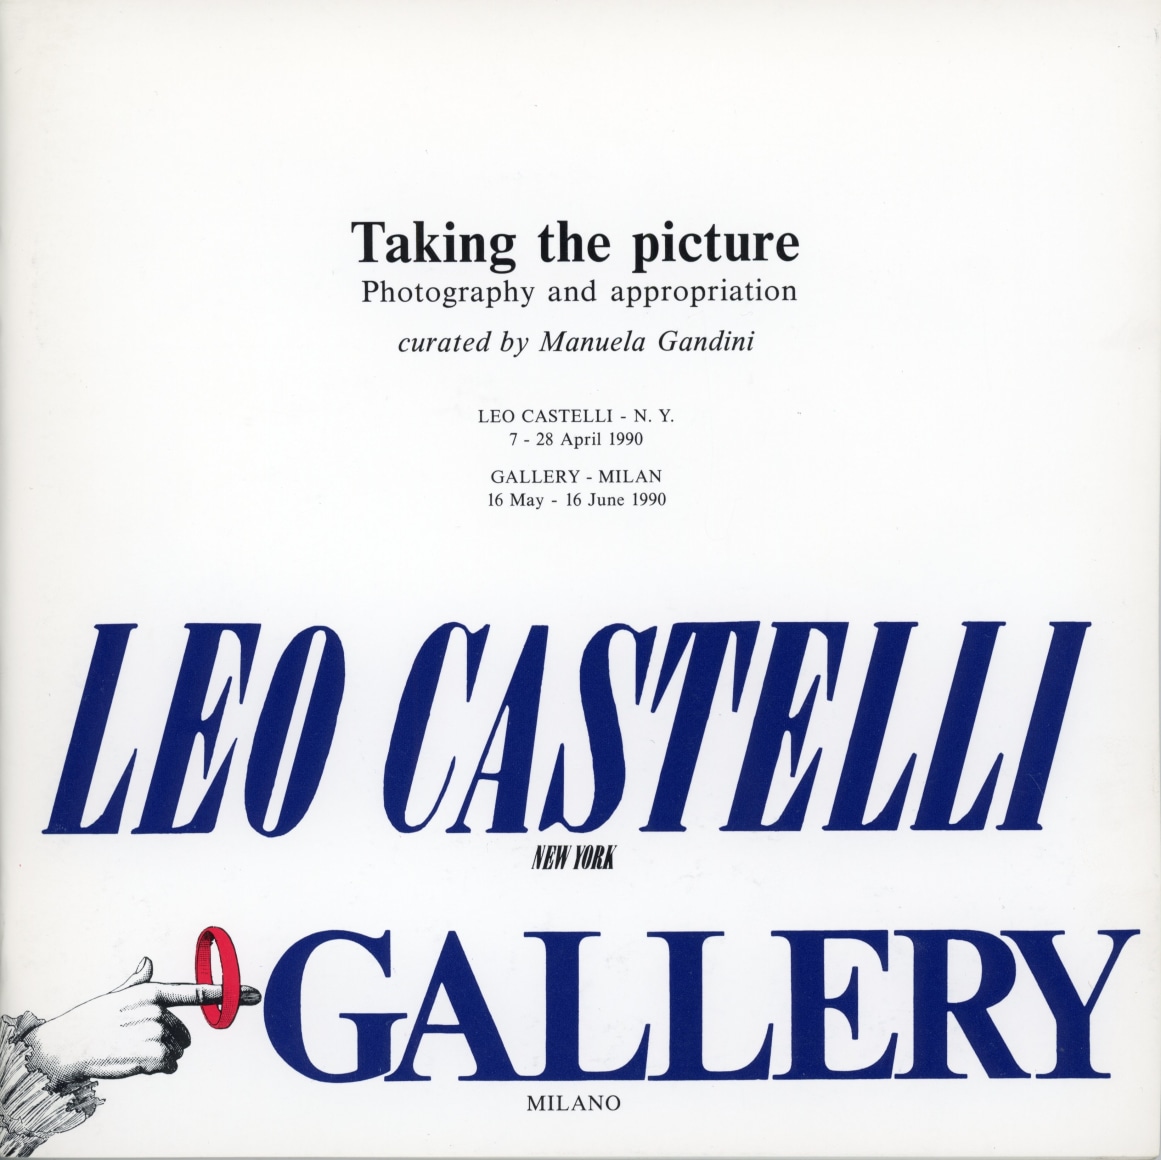 Cover of Taking the picture: Photography and appropriation catalogue by Leo Castelli Gallery in 1990